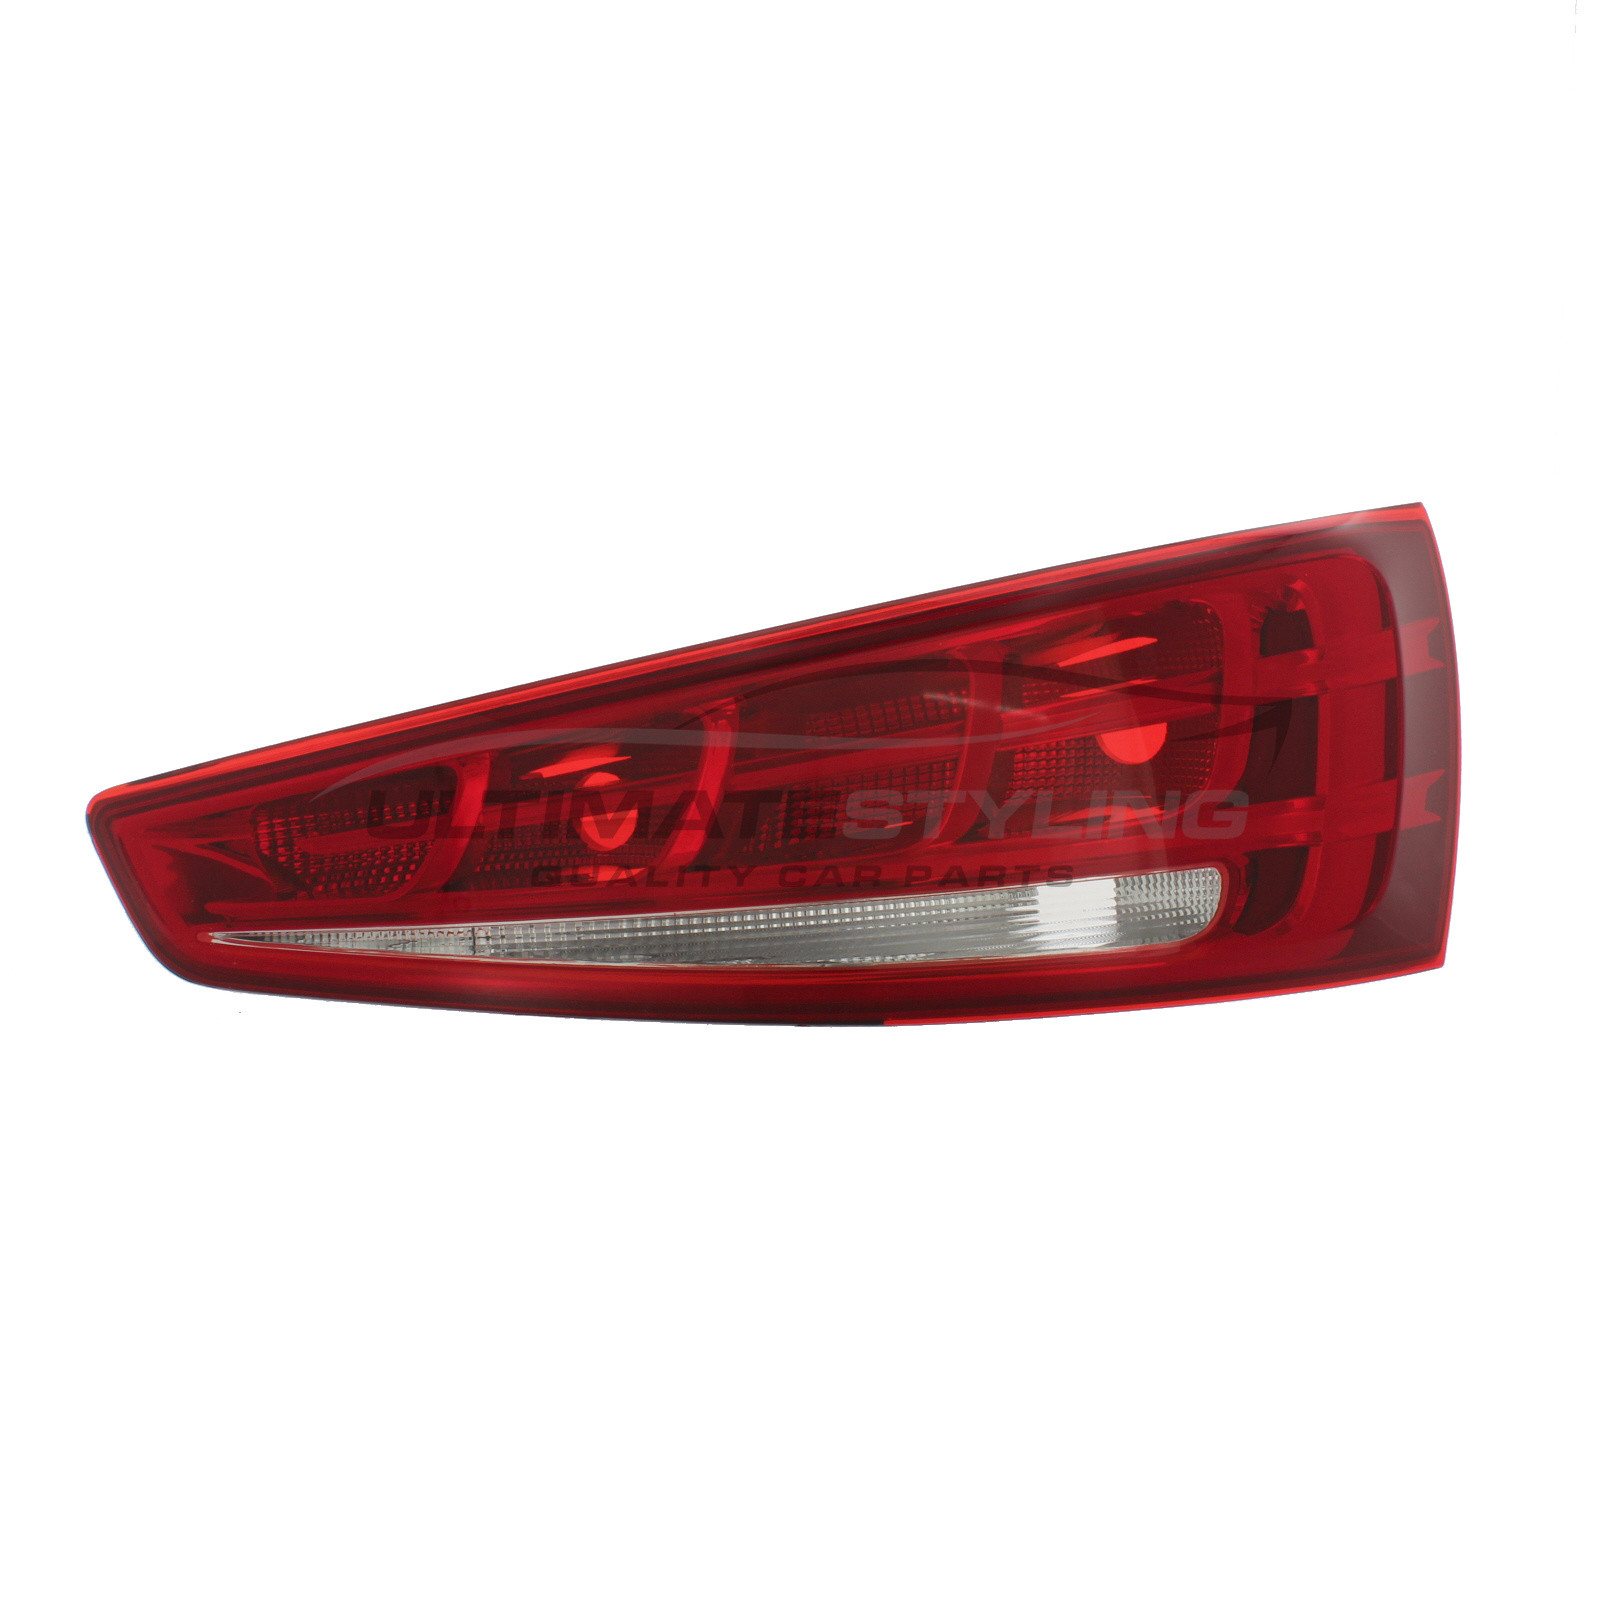 Audi Q3 2011-2015 Non-LED with Clear Indicator Rear Light / Tail Light Excluding Bulb Holder Drivers Side (RH)